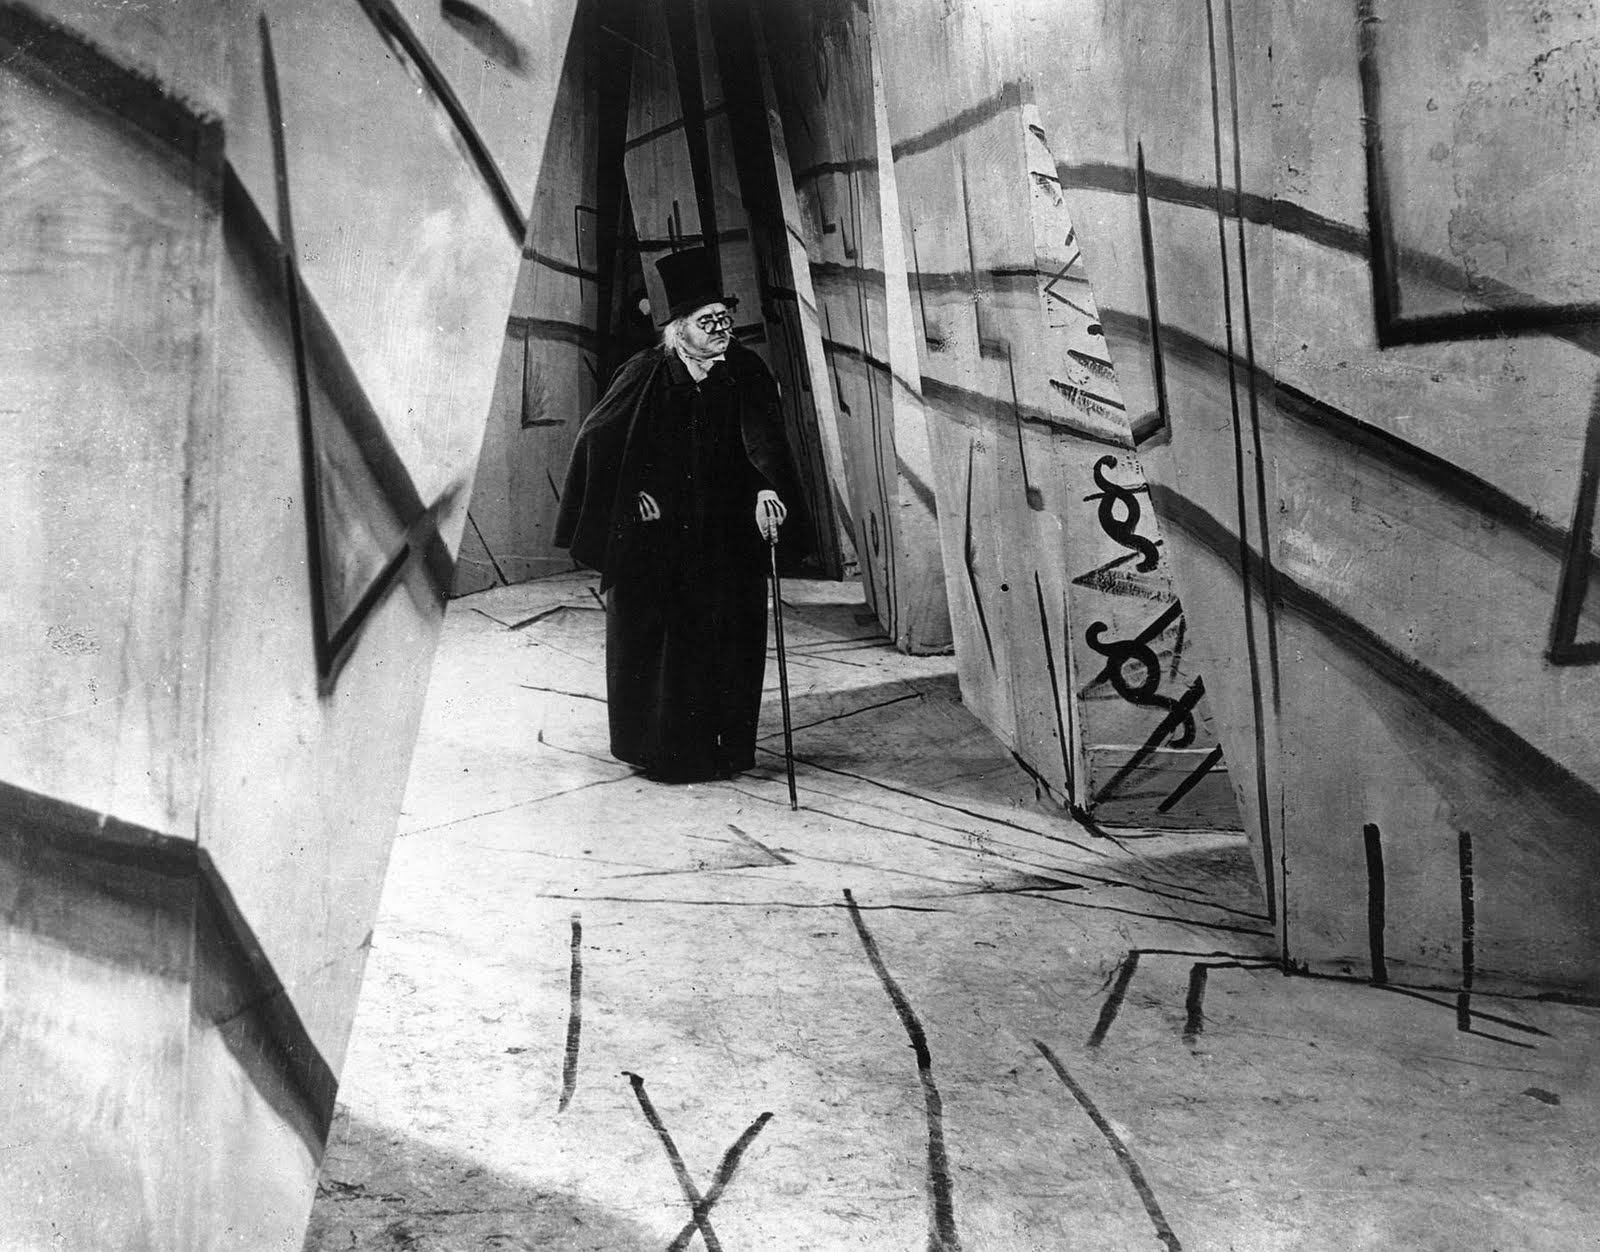 A frame from 'The Cabinet of Dr. Caligari' showing the style of German Expressionism, with a stark contrast and an erratic and angular mise-en-scene, Dr. Caligari walks through a long corridor, wearing a hat, suit and cane